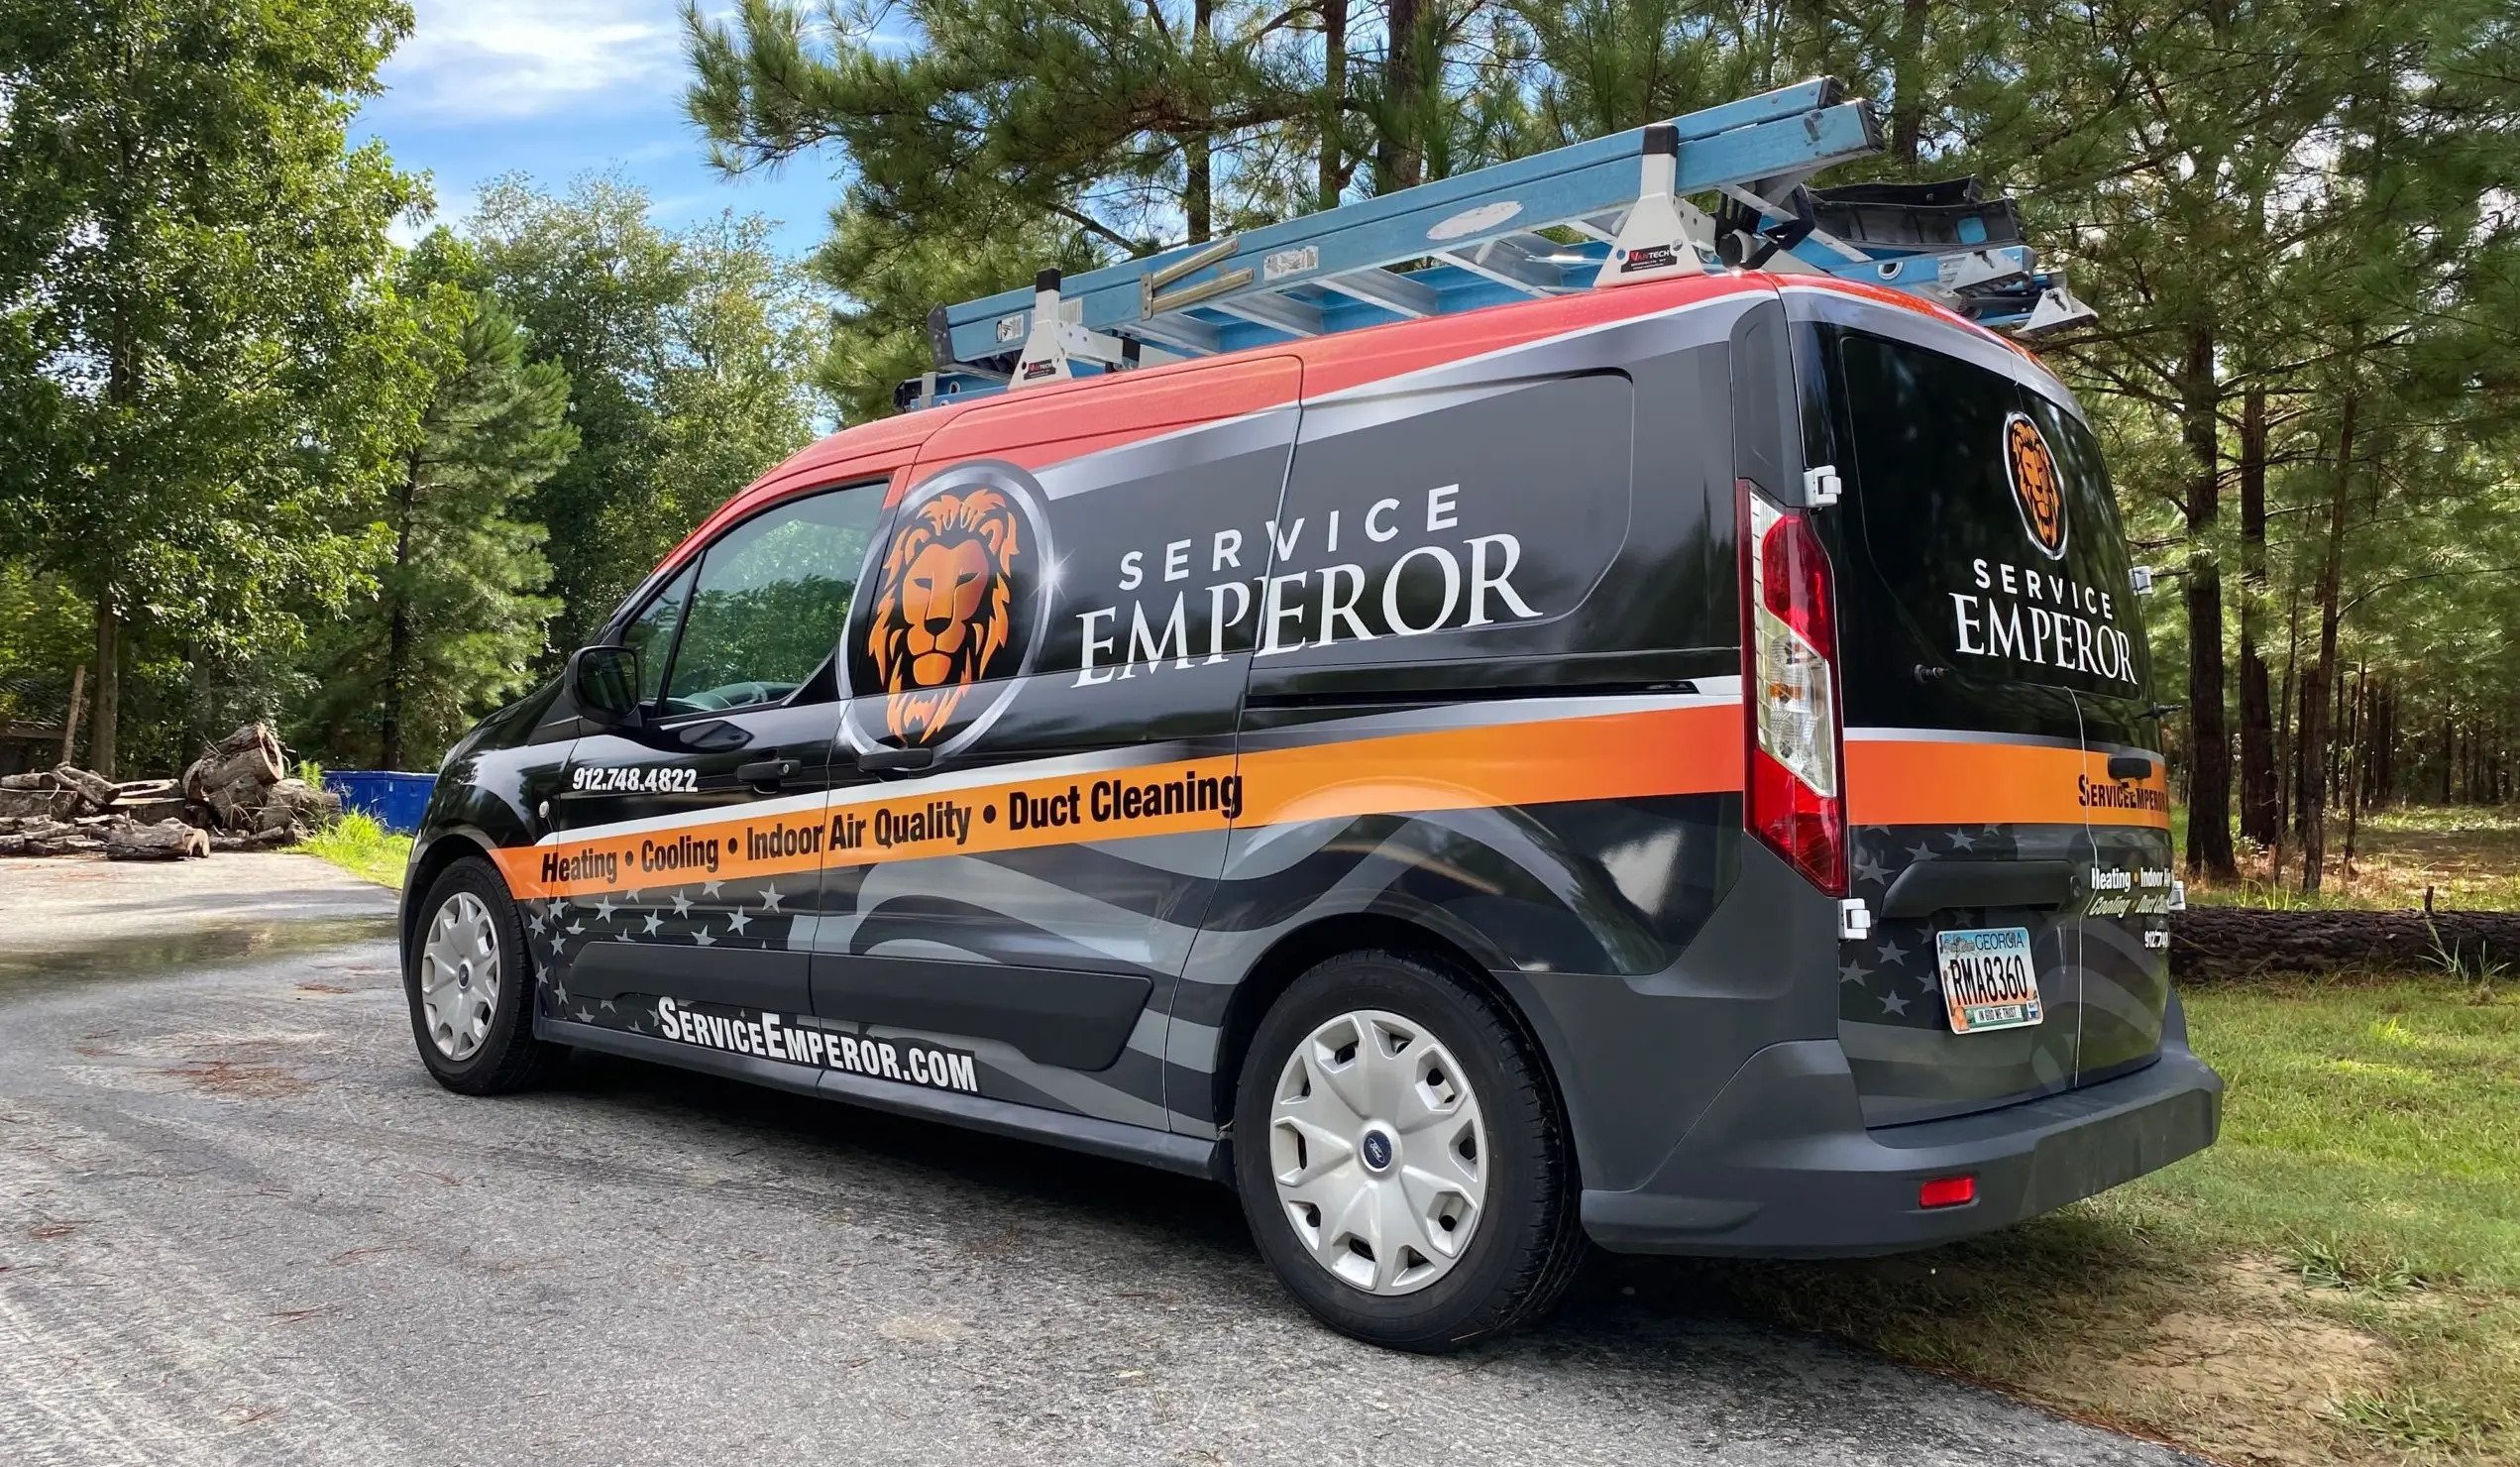 Service Emperor Heating, Air Conditioning, Plumbing, Electrical & More is a Reputable Heating Contractor and Pooler Ac Repair Company in Pooler, GA